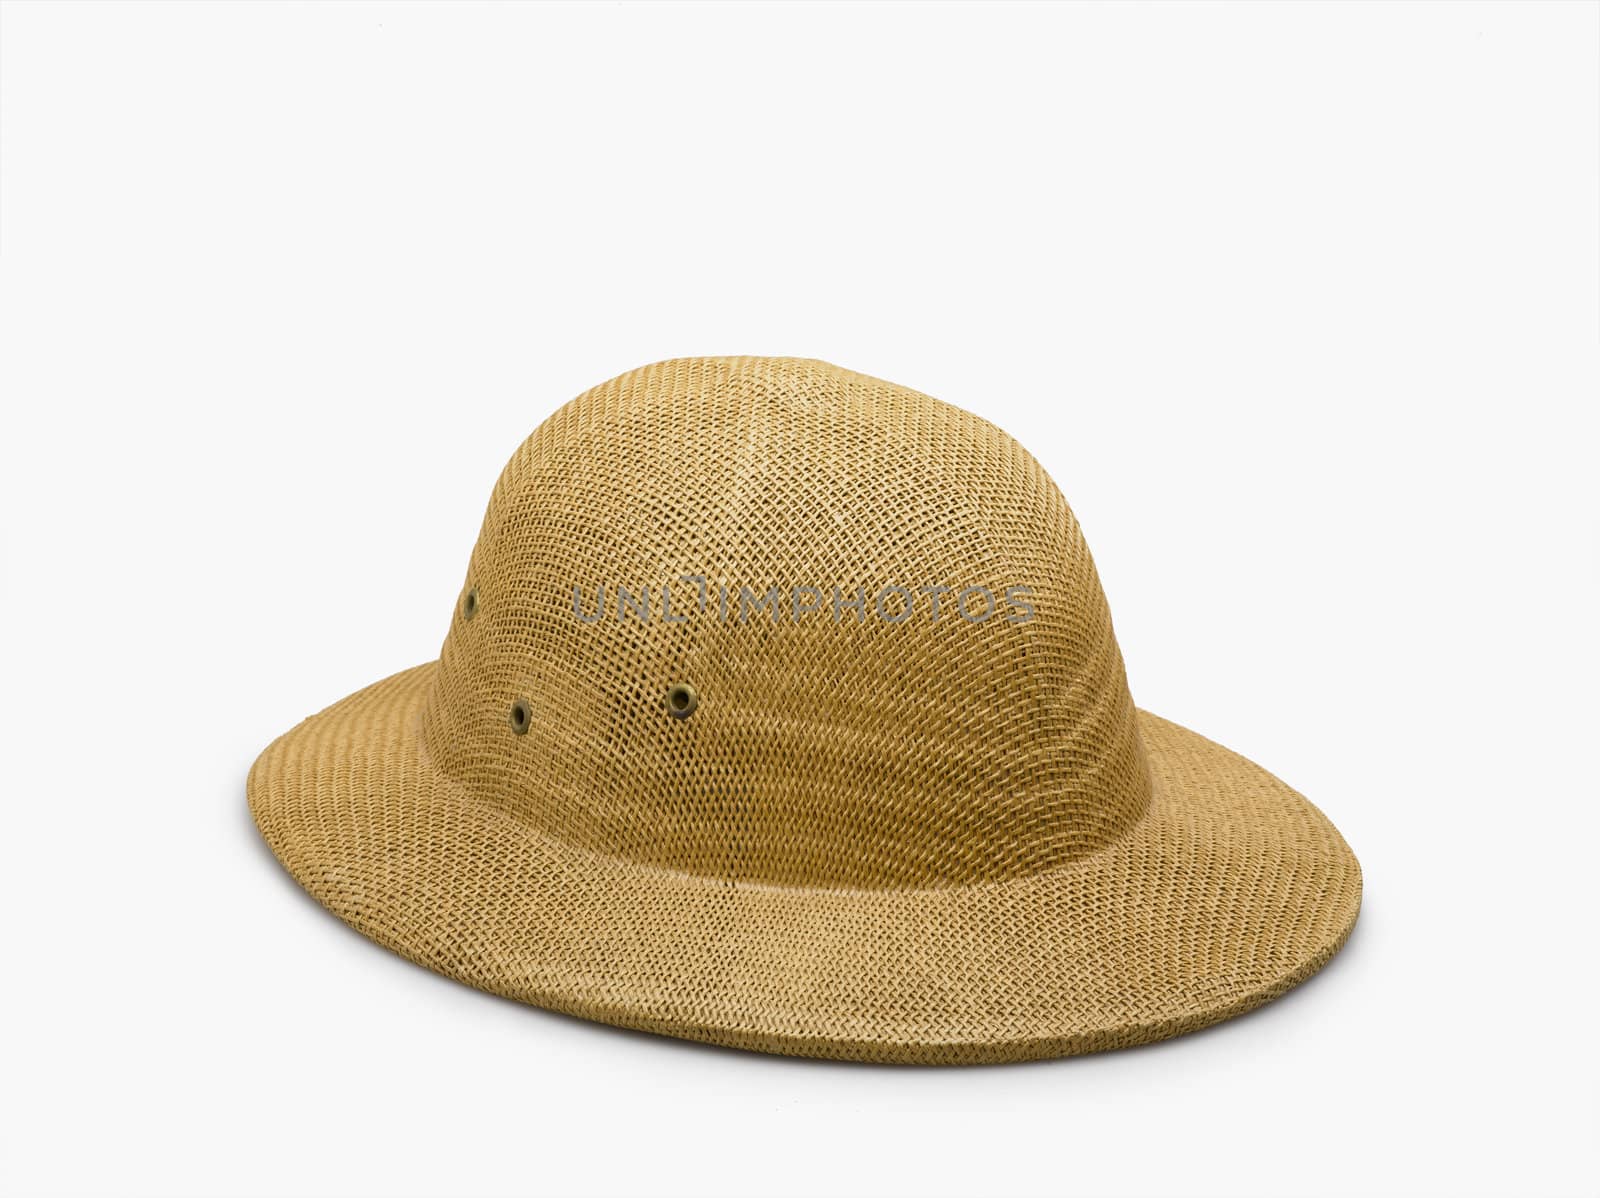 pith helmet isolated on white